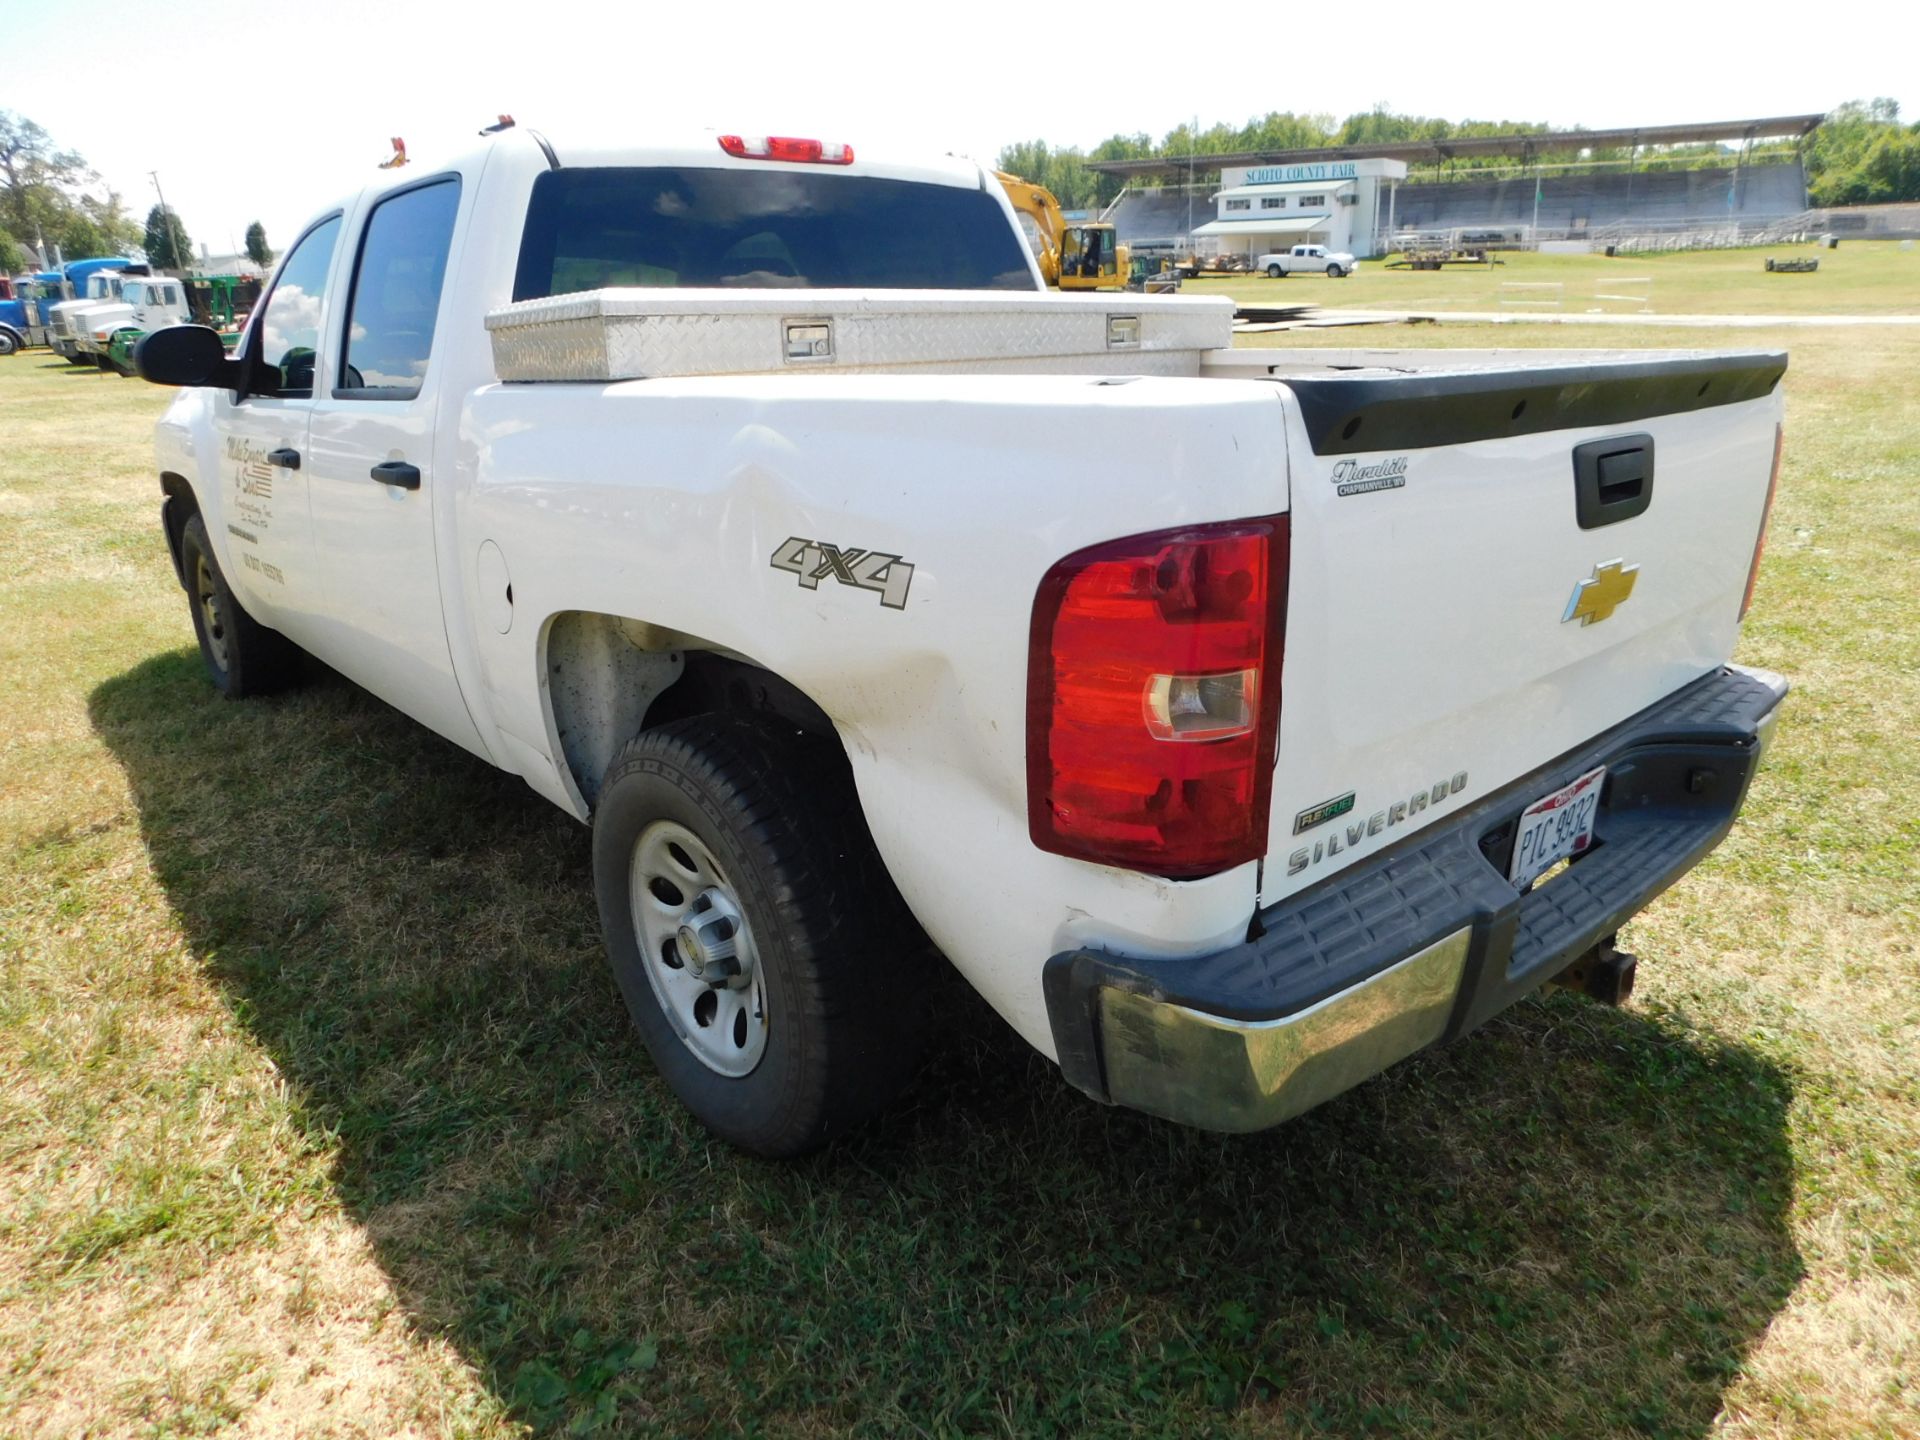 2011 Chevy 2500 Silverado Pickup, Crew Cab, 6' Bed, Automatic, AM/FM, 4WD, AC, PL, Aluminum Tool - Image 7 of 50